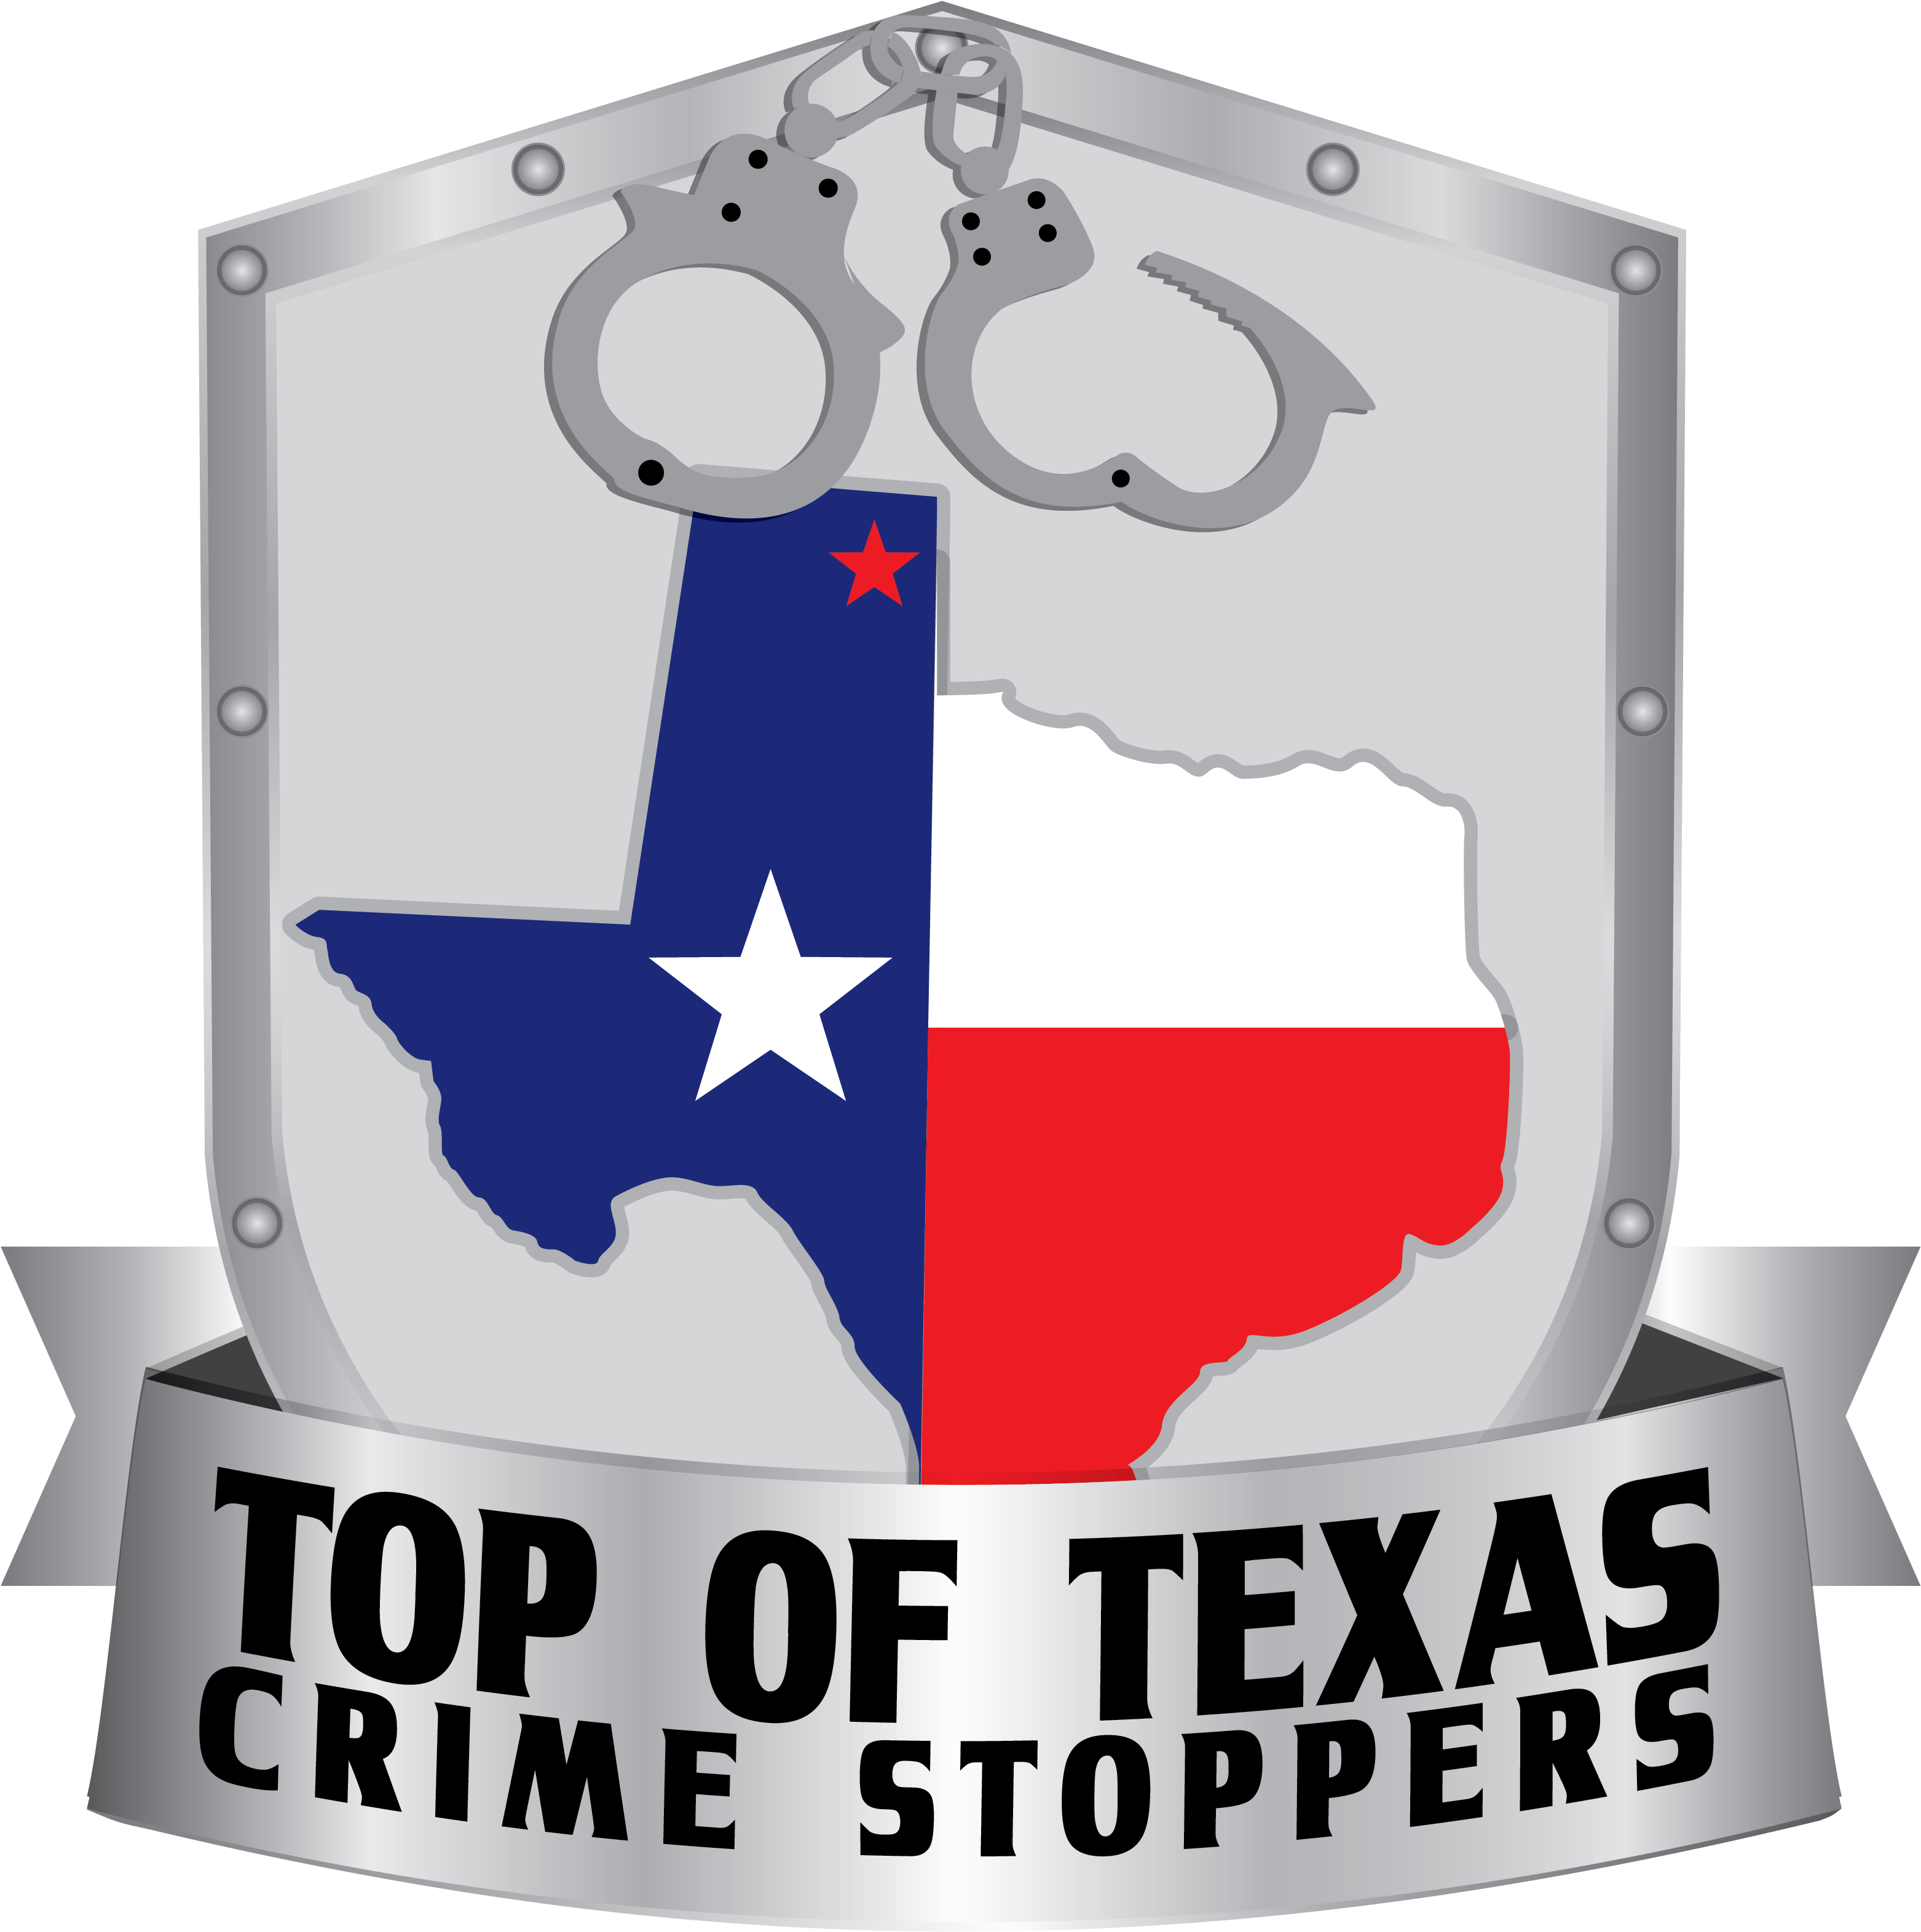 Top Of Texas Crime Stoppers Asks Public For Tips Regarding - Crest (3713x3938)